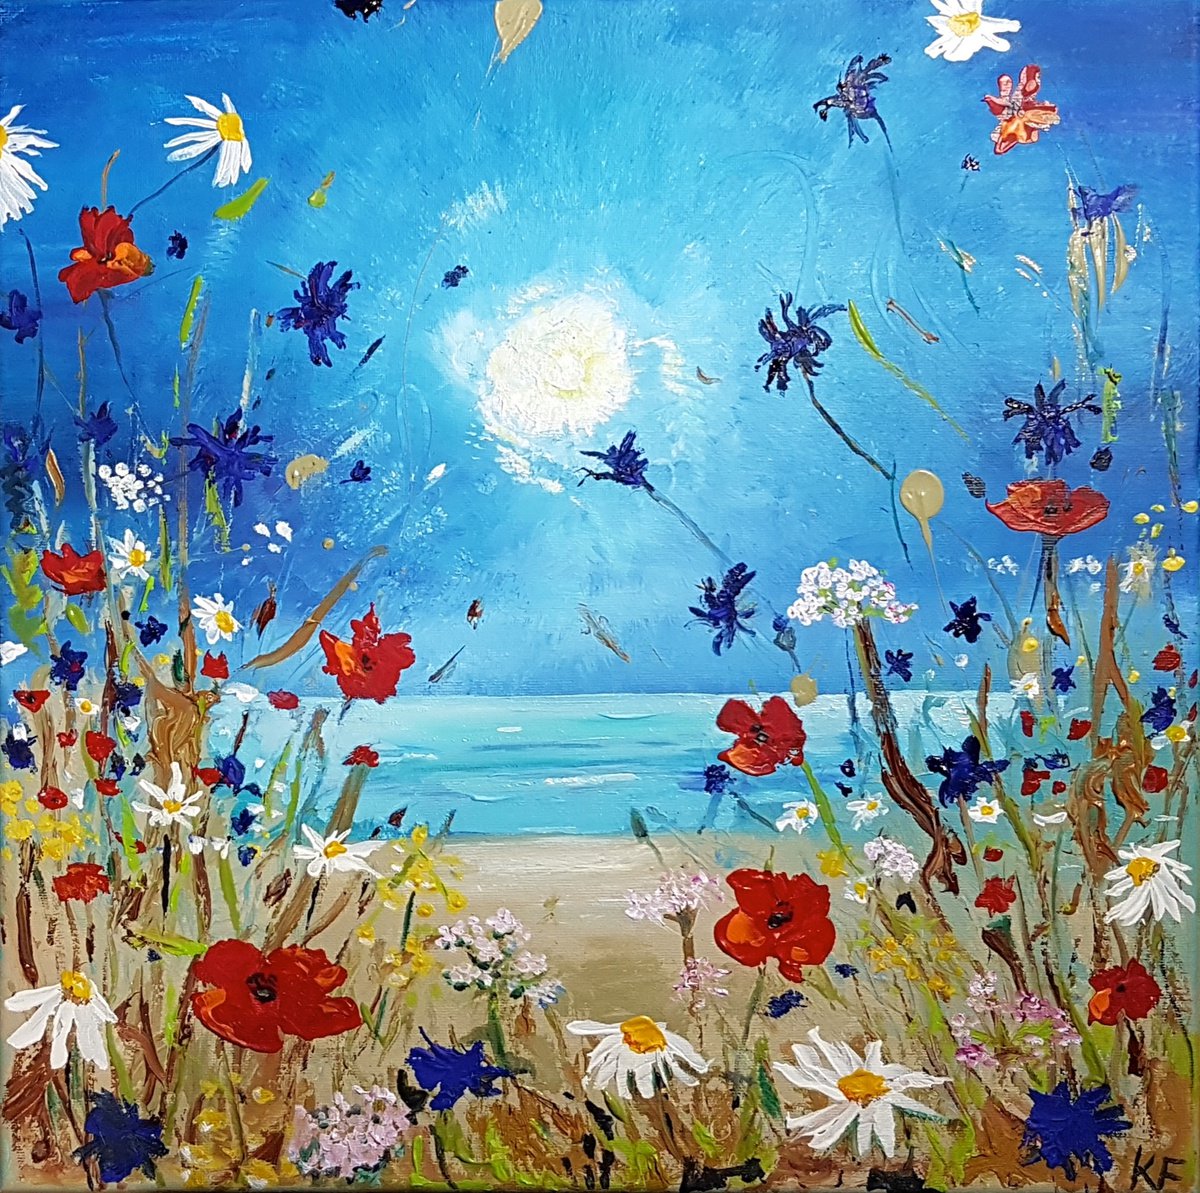 Wild flowers by the sea by Kathrin Floge